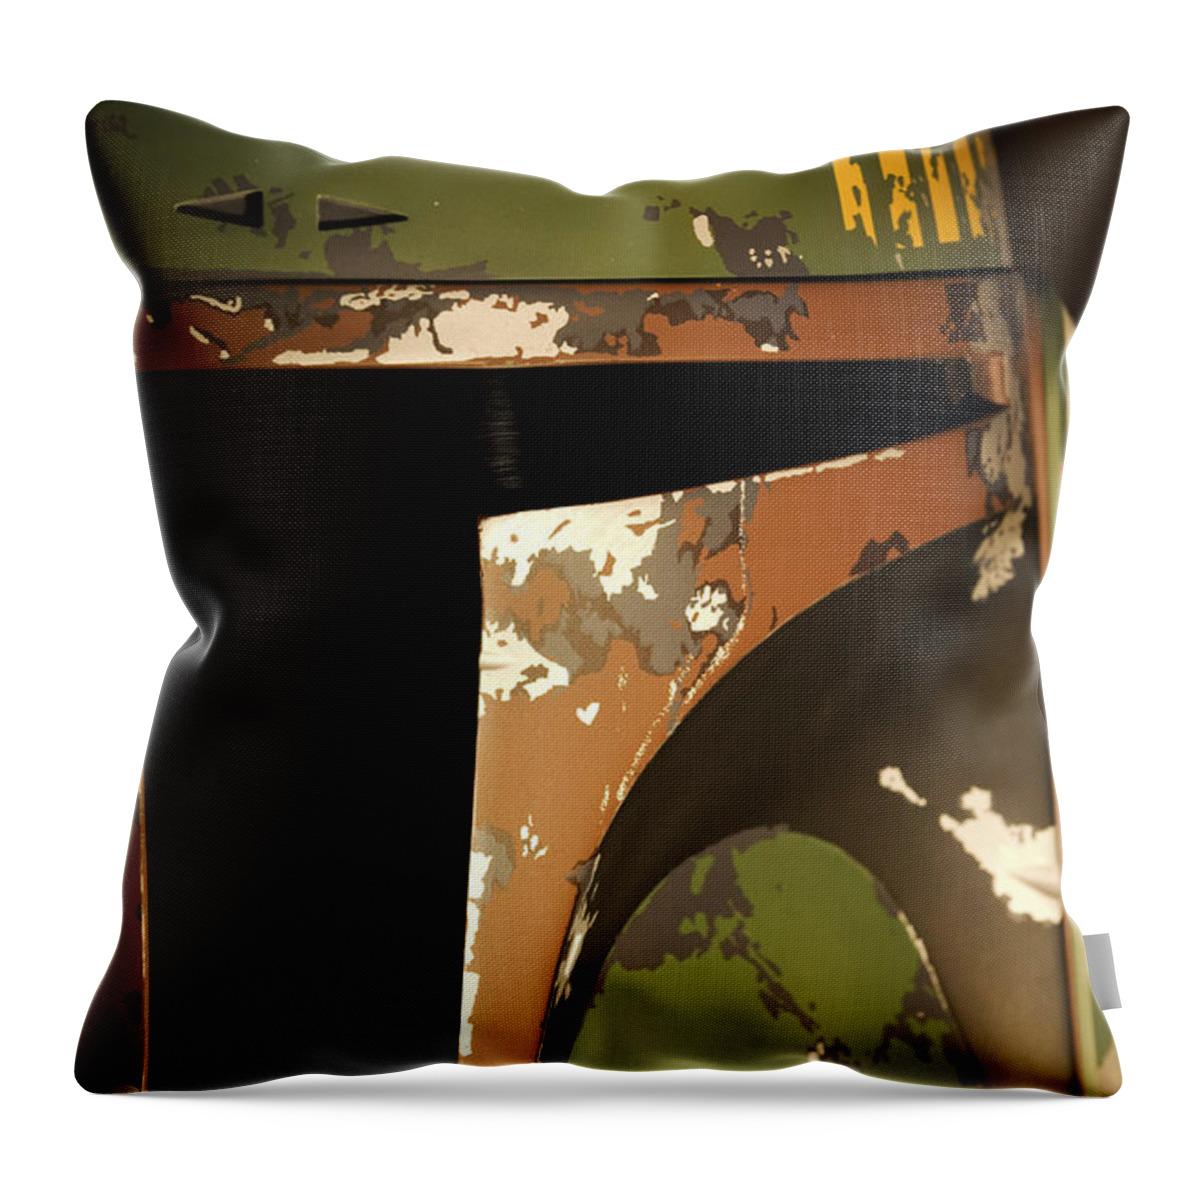 Boba Fett Throw Pillow featuring the photograph Boba Fett by Micah May